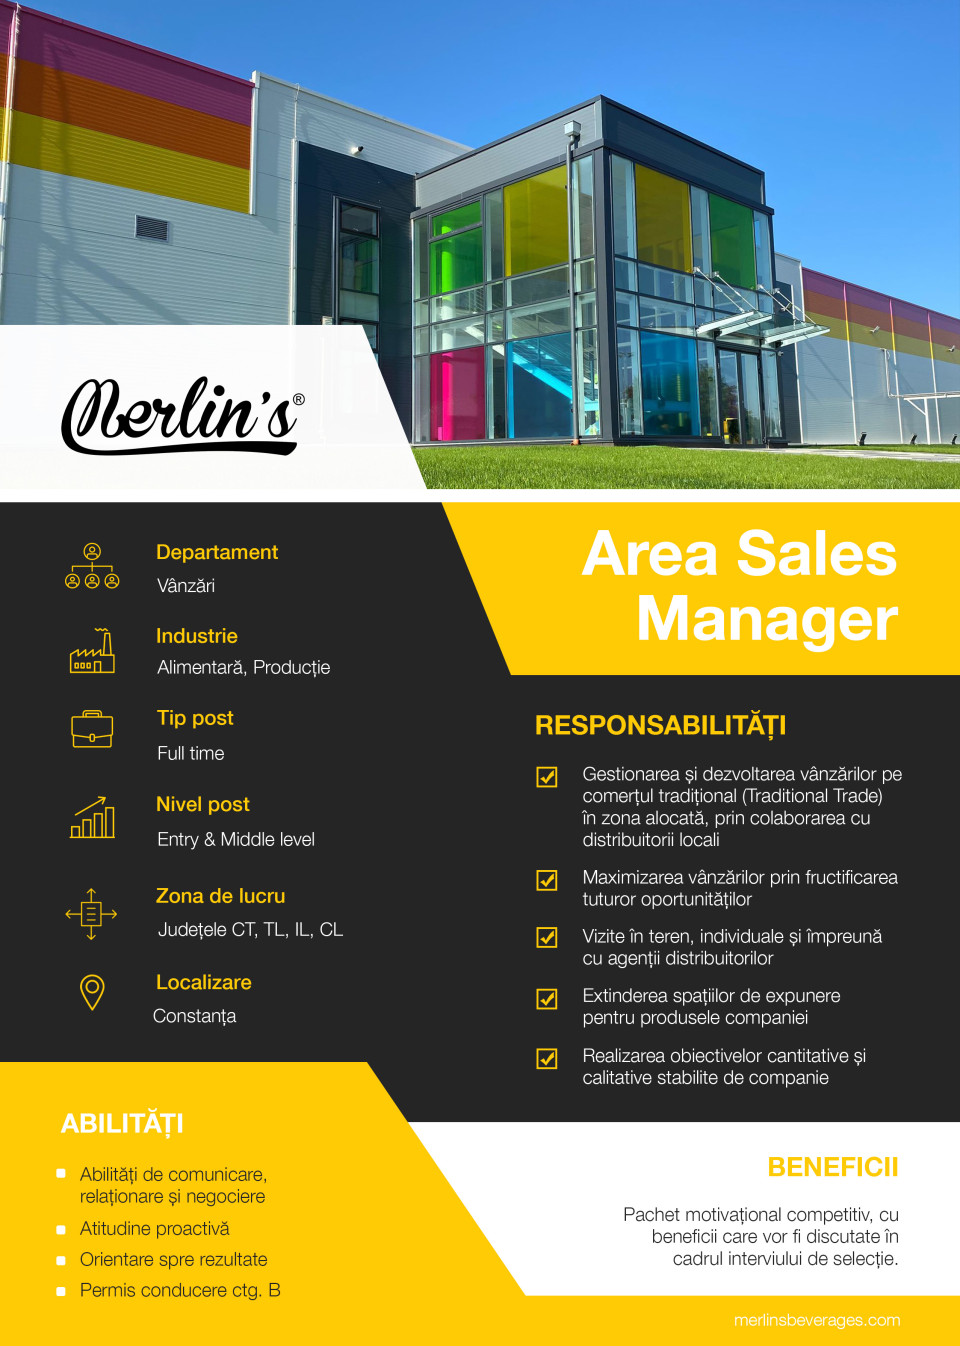 Area Sales Manager